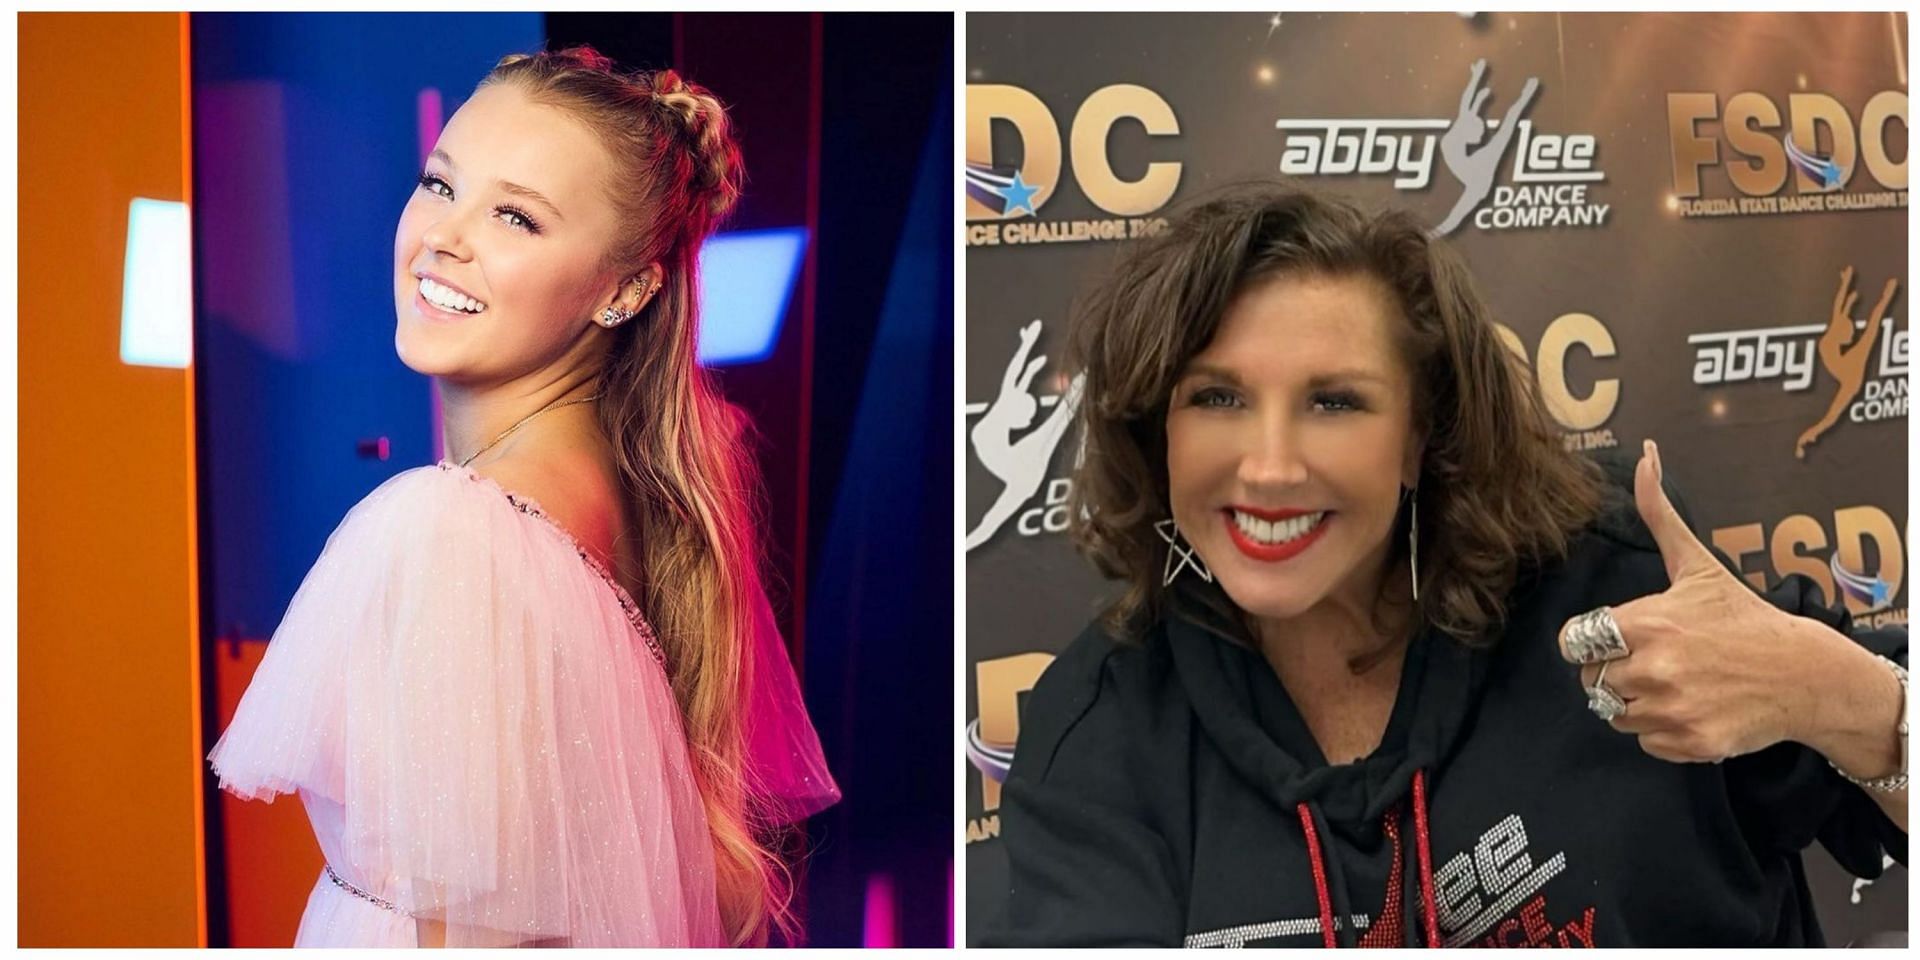 JoJo Siwa and shares a special relationship with Abby Lee Miller. (Image via Instagram/ @JoJoSiwa, @therealabbylee)